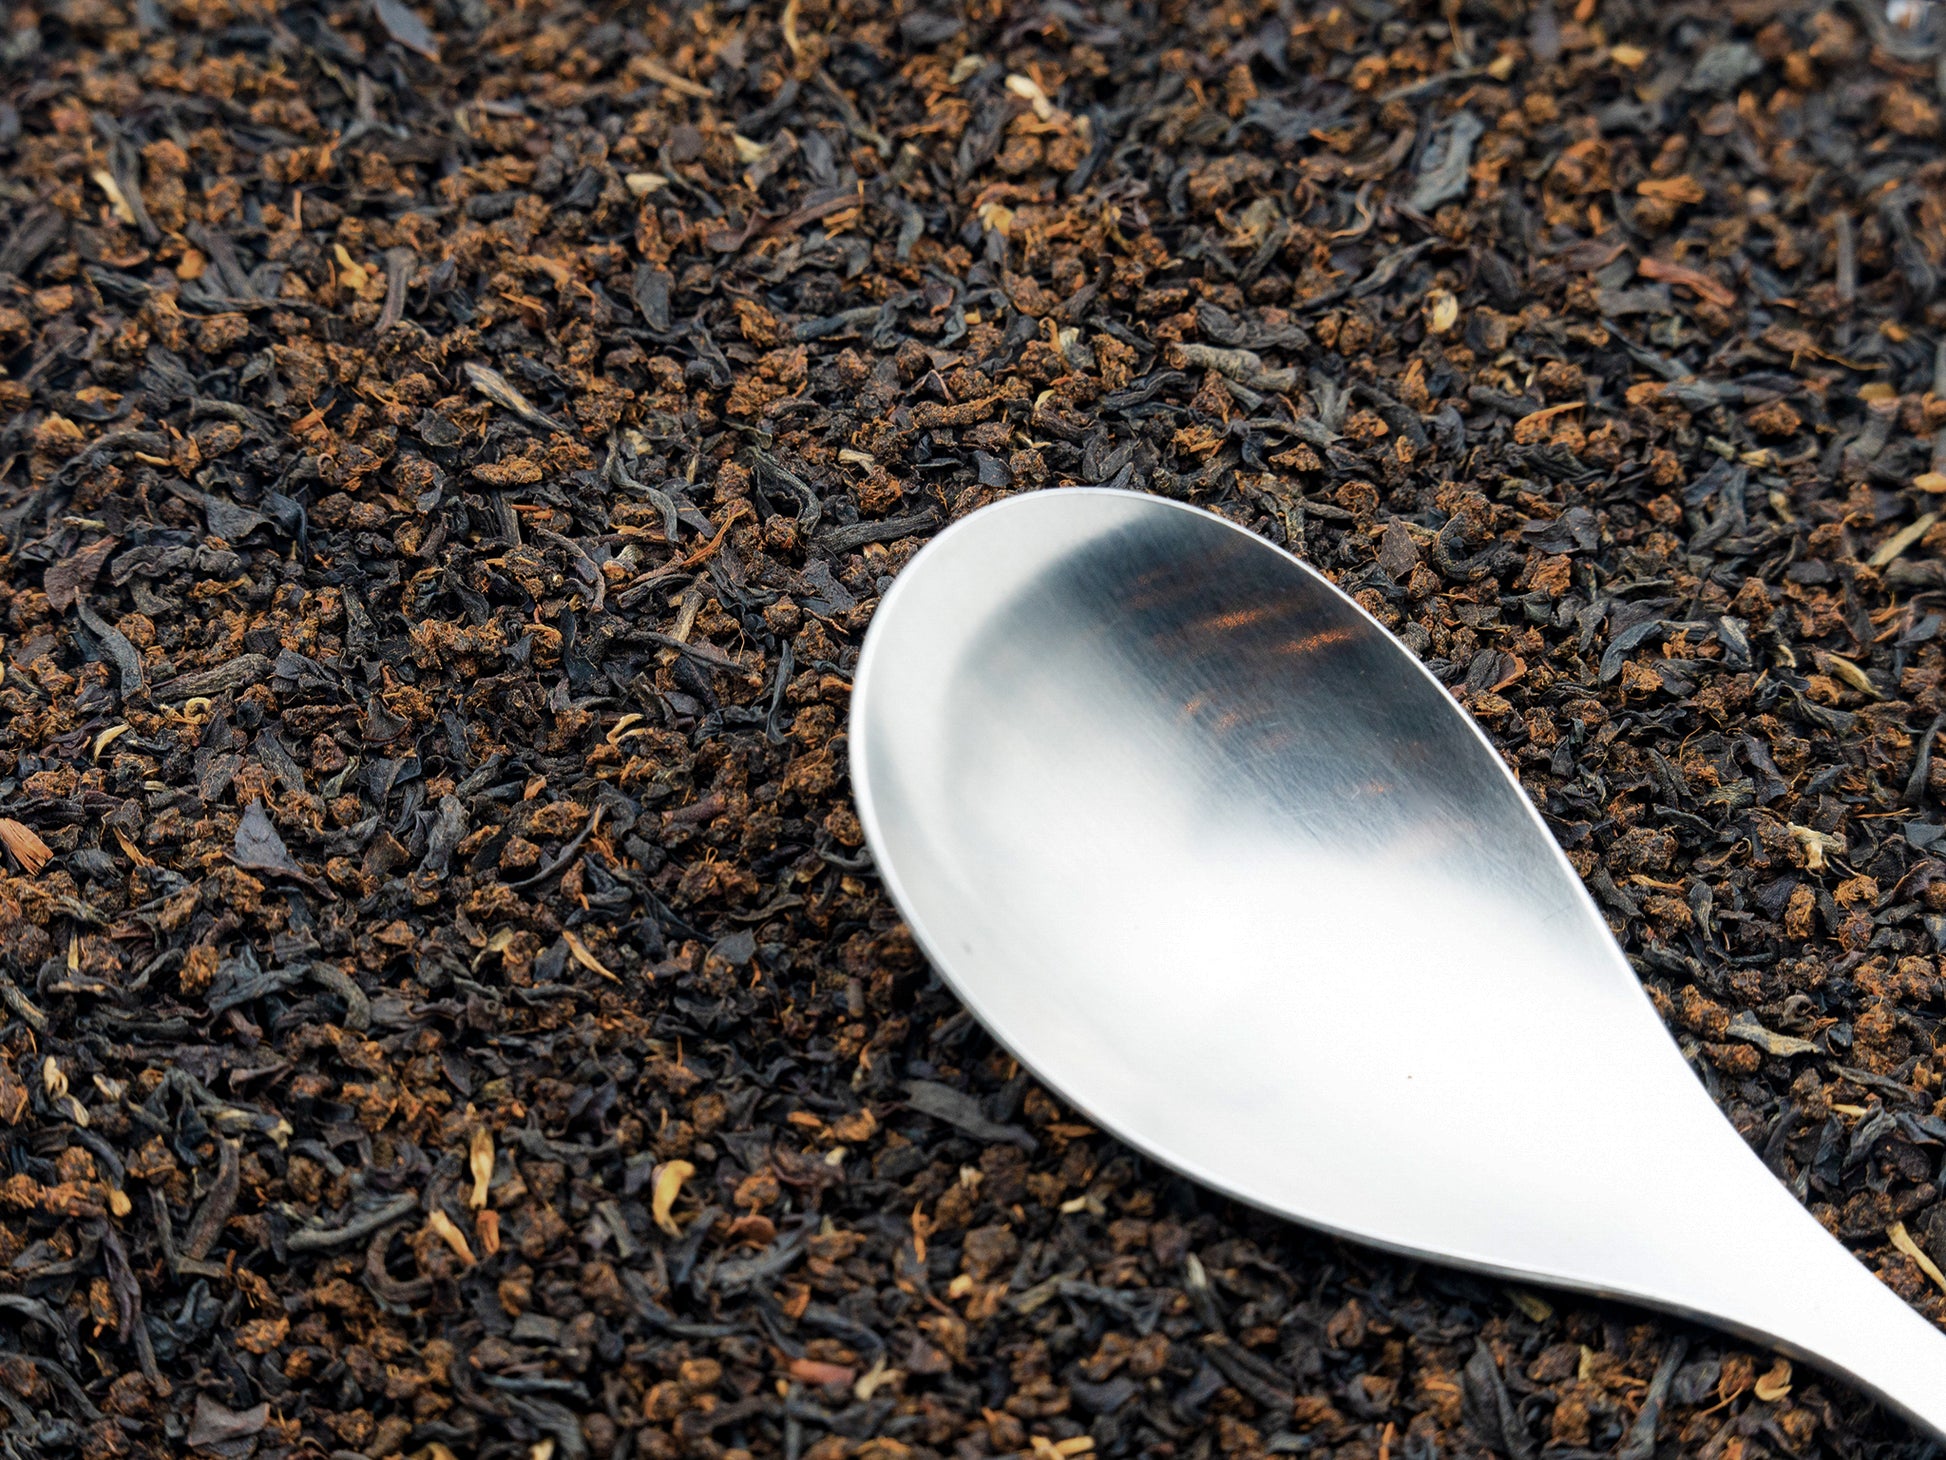 TEA23 loose English Breakfast Tea with a spoon resting on top